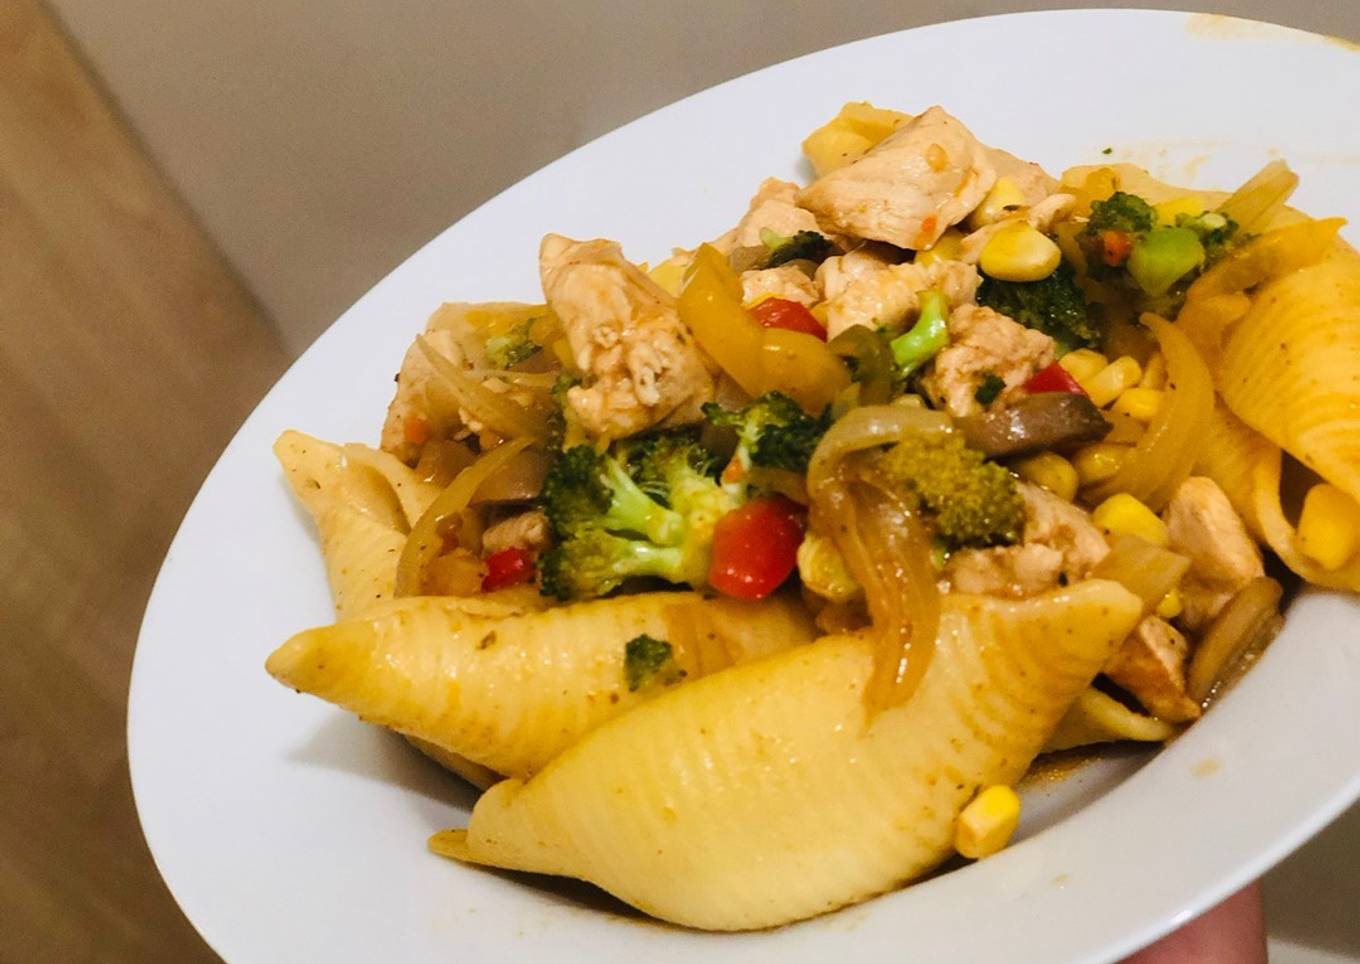 Chicken and vegetable pasta